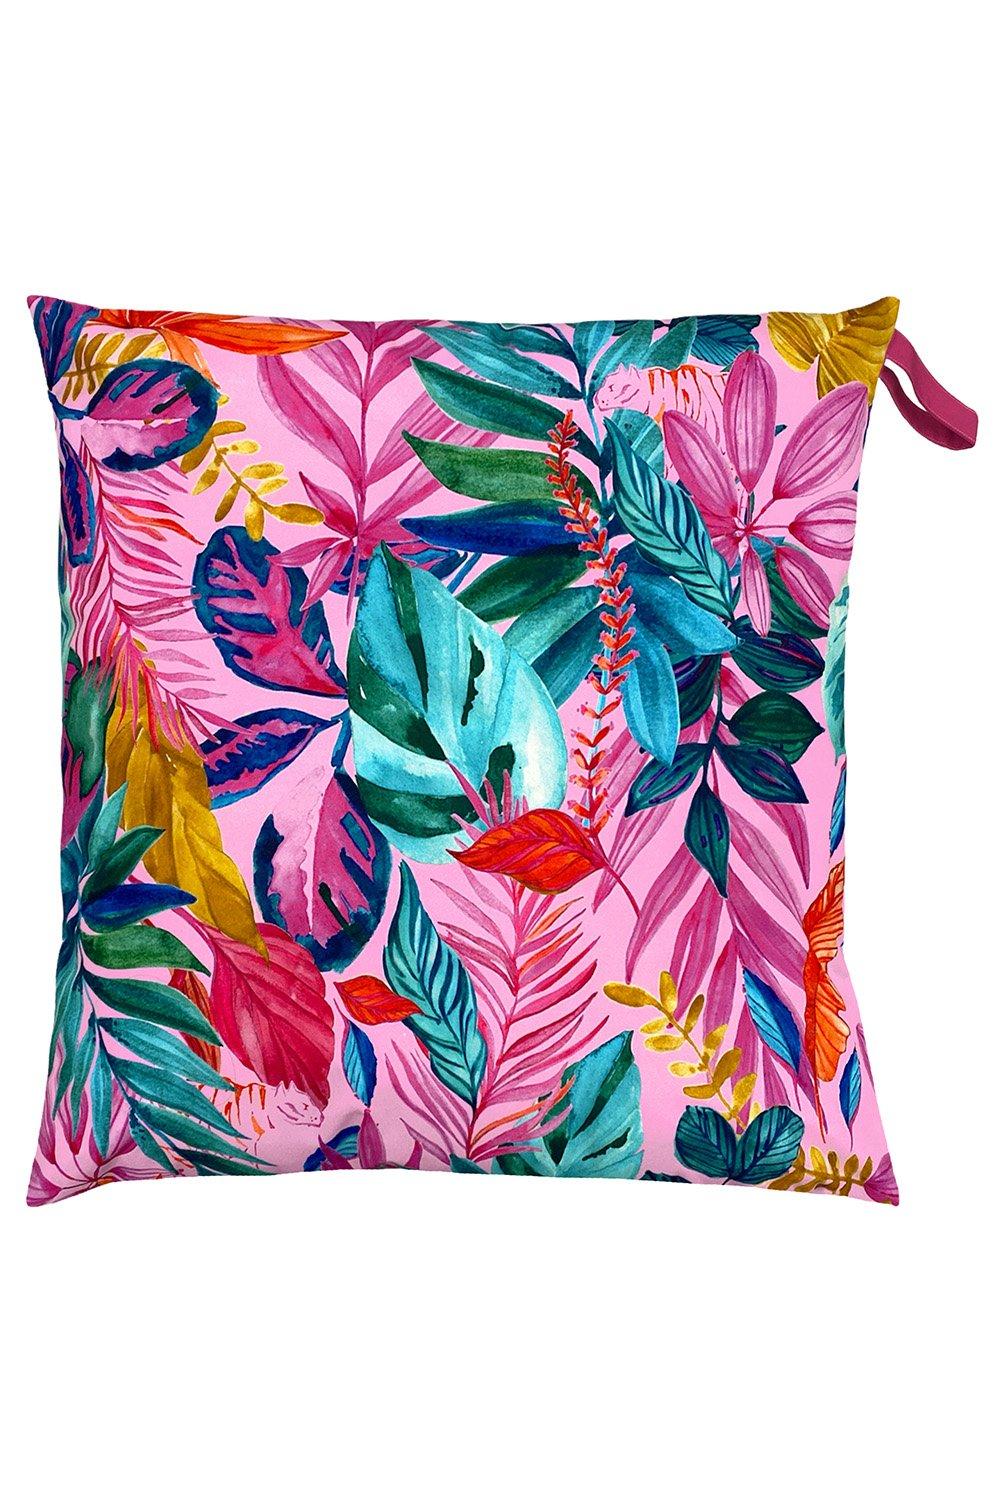 Psychedelic Jungle Tropical Outdoor UV & Water Resistant Floor Cushion